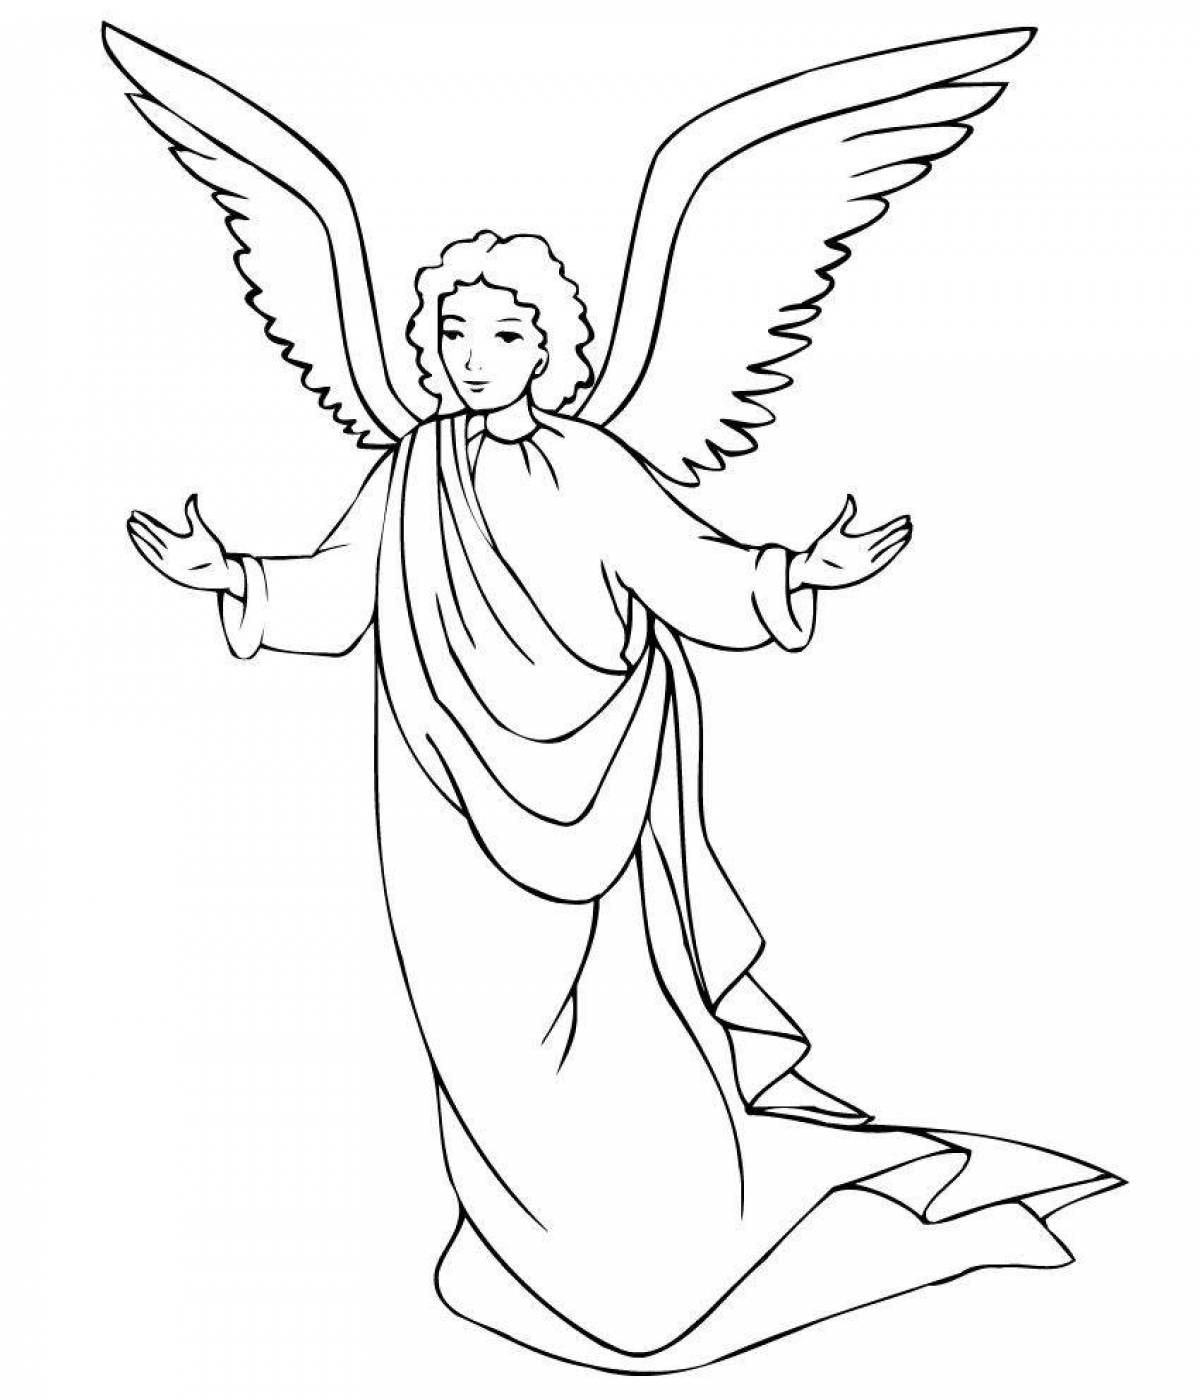 Coloring page adorable little angel